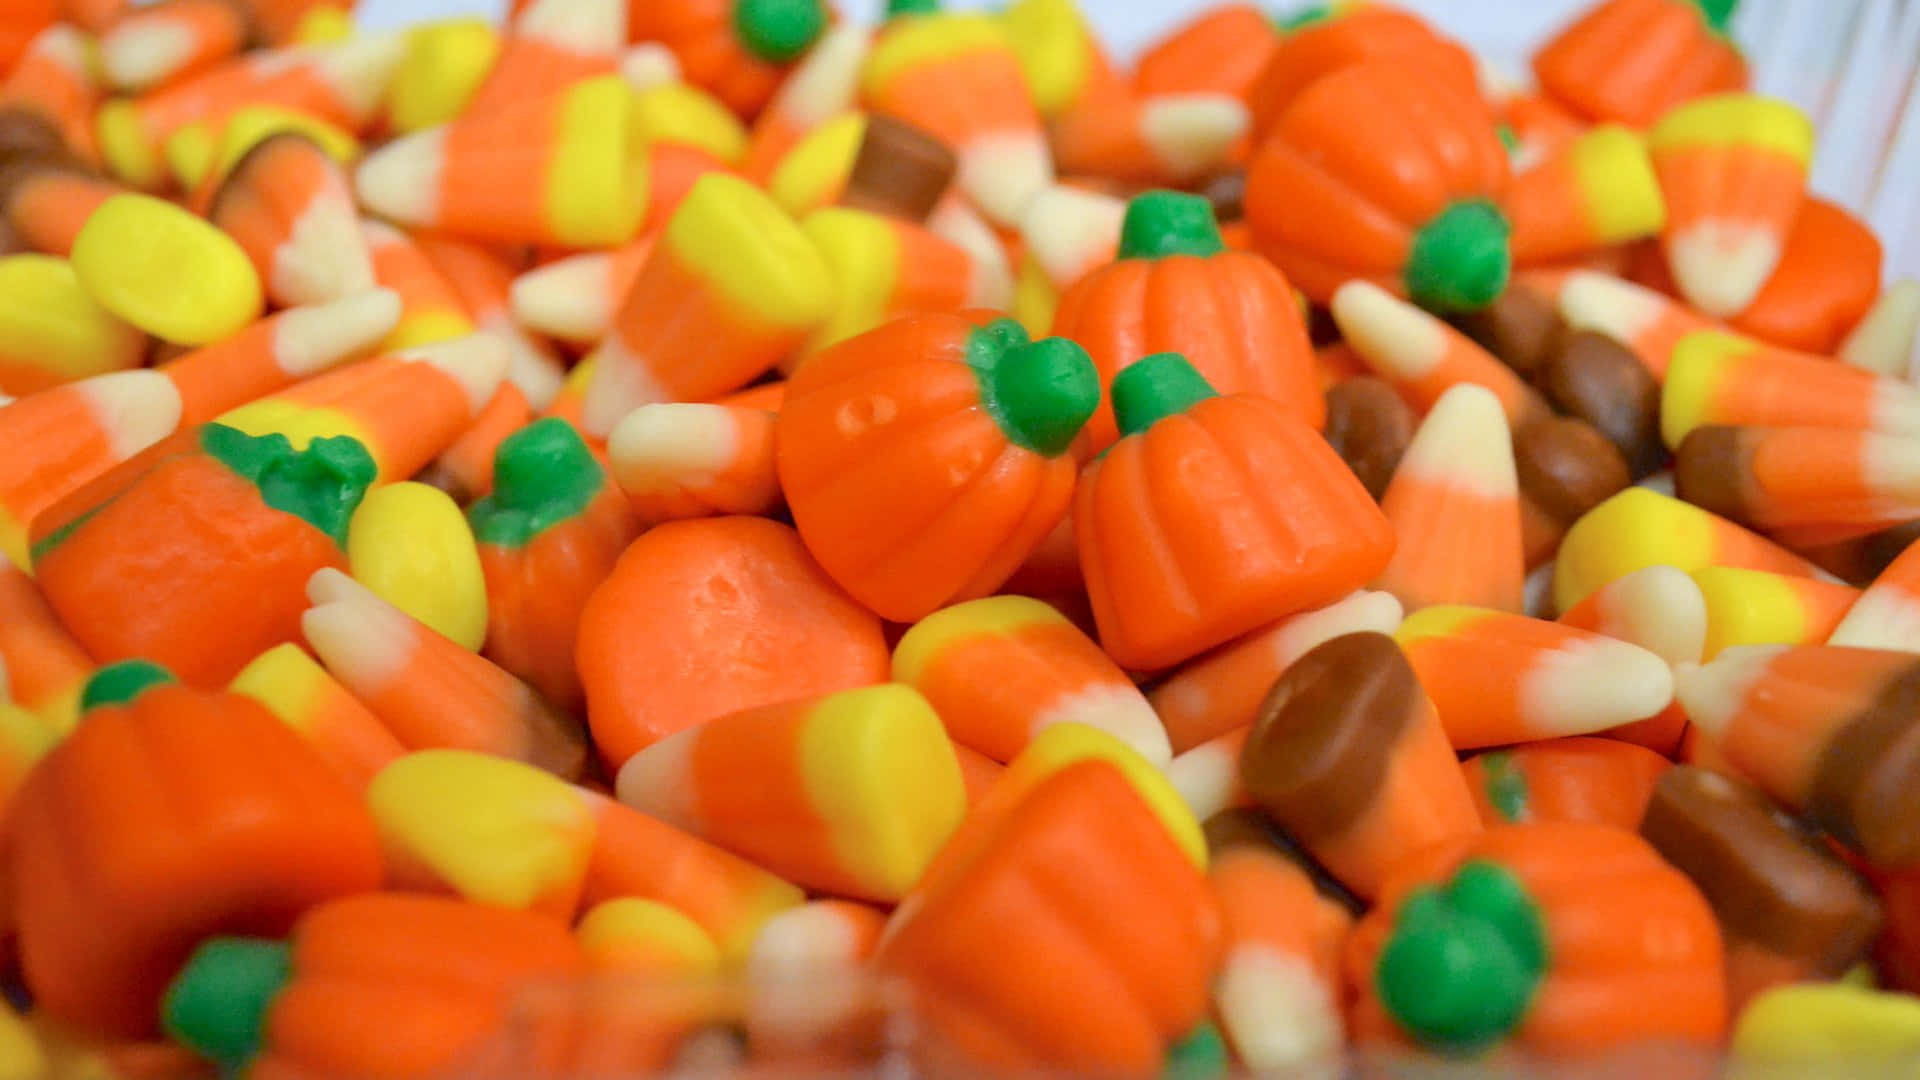 Try Delicious Halloween Treats to Trick or Treat! Wallpaper